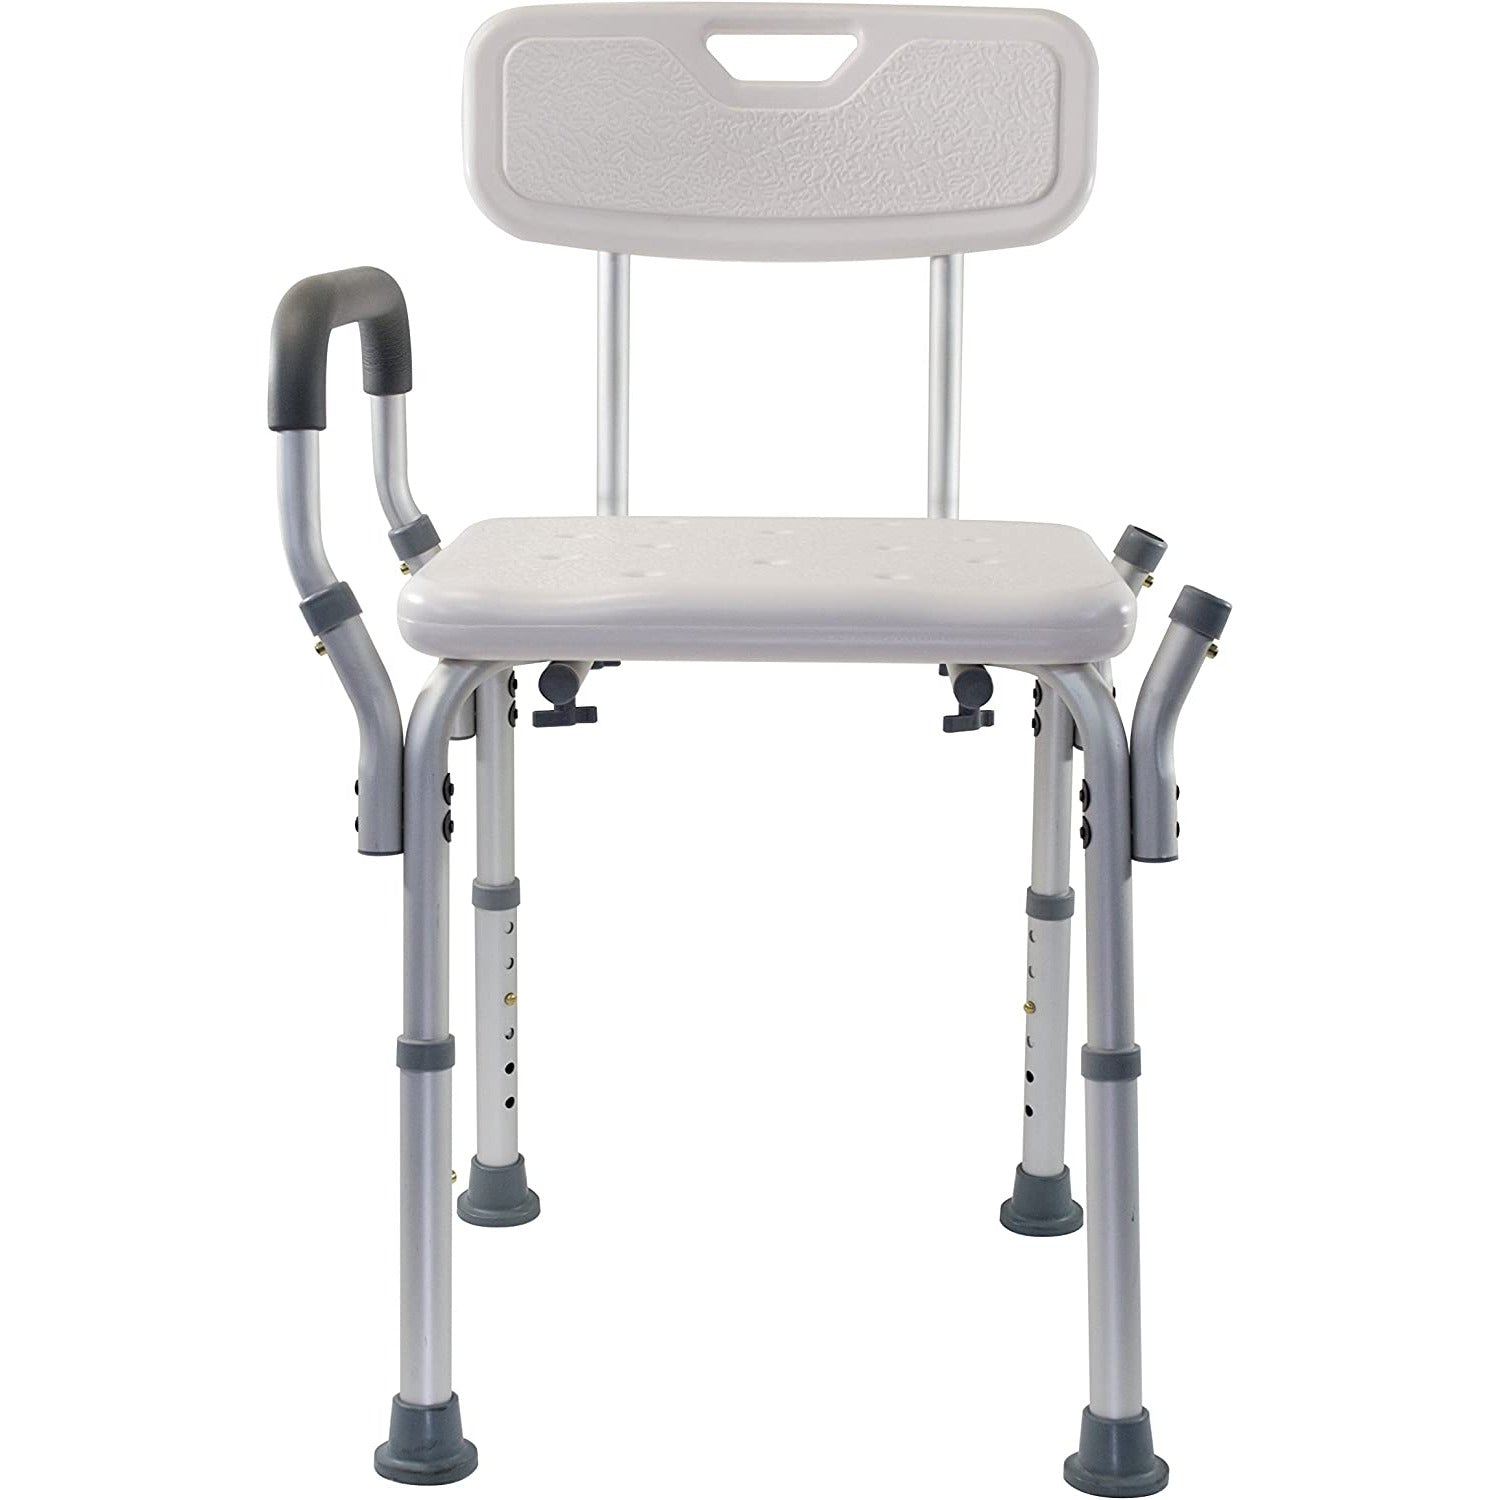 TrustLine Shower Chair | Safety Support Seat | For Elderly, Disabled, and Injured